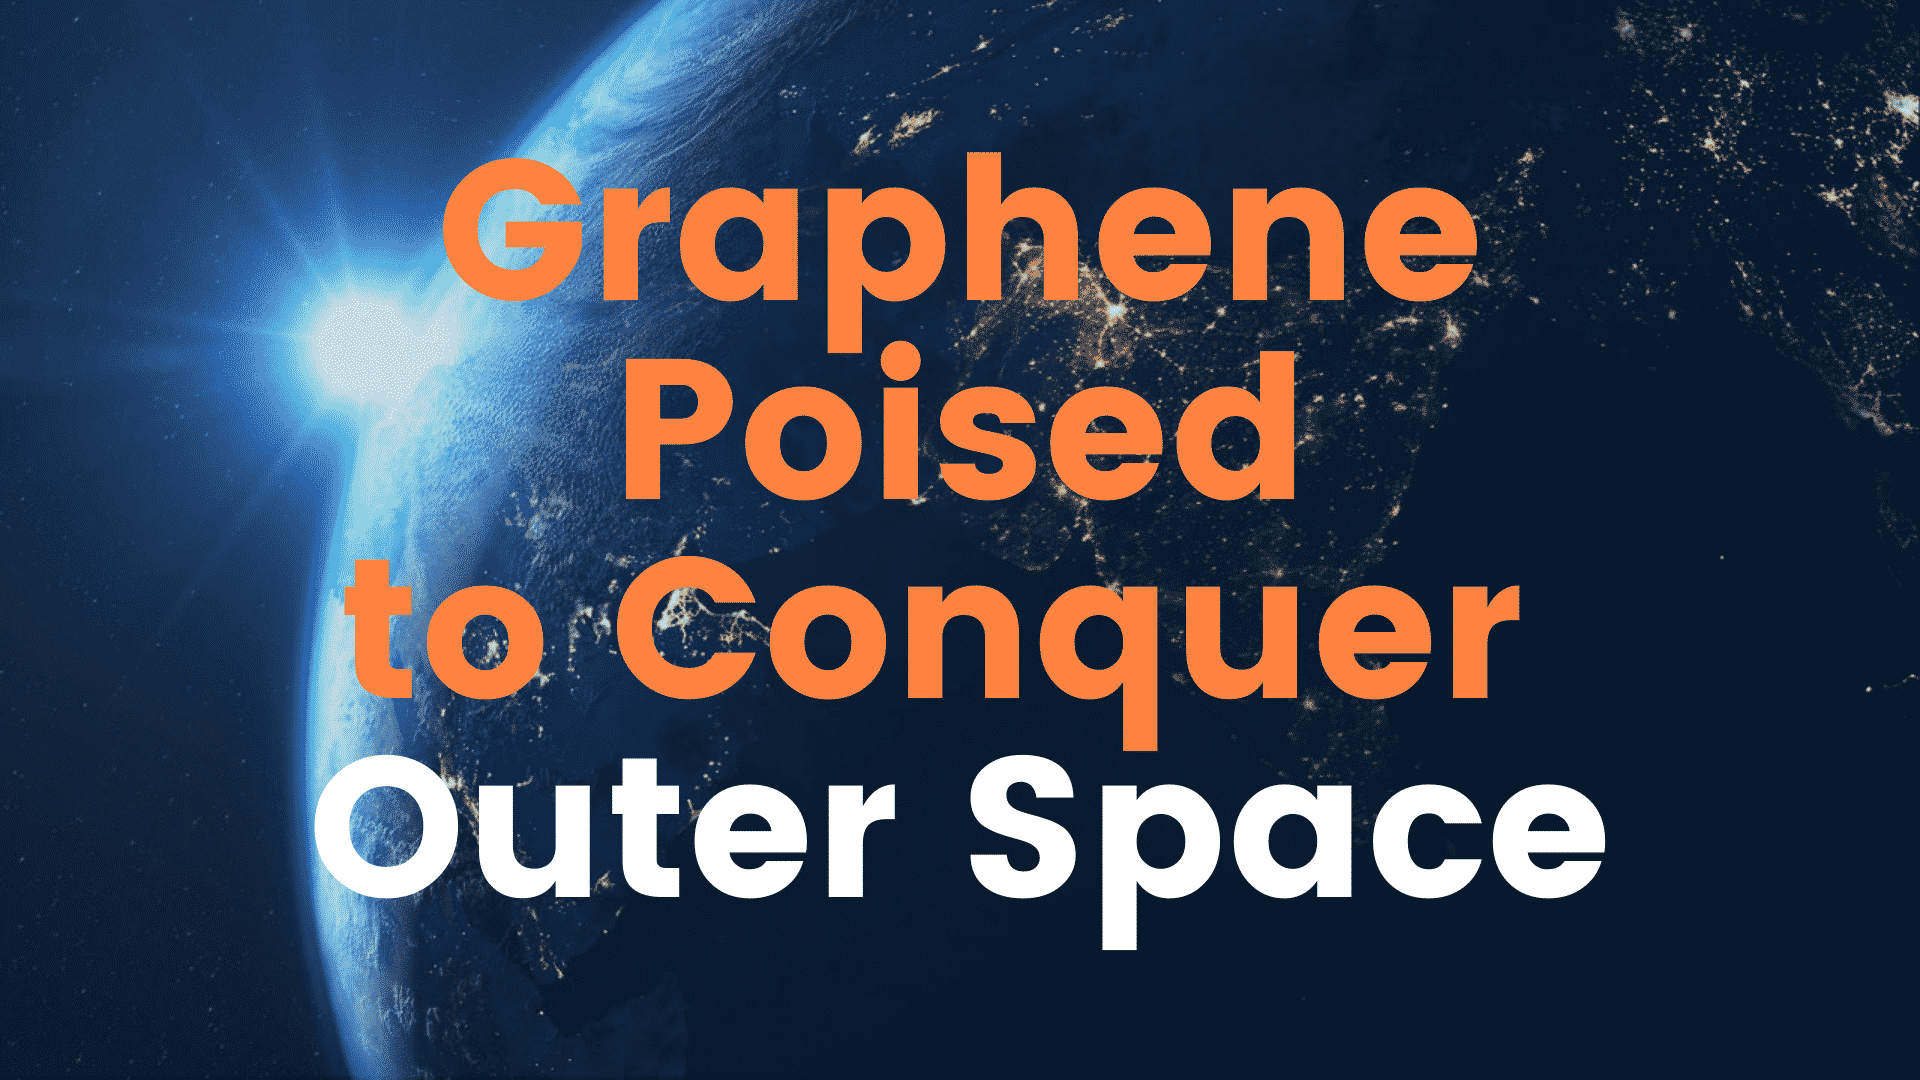 Graphene poised to conquer outer space